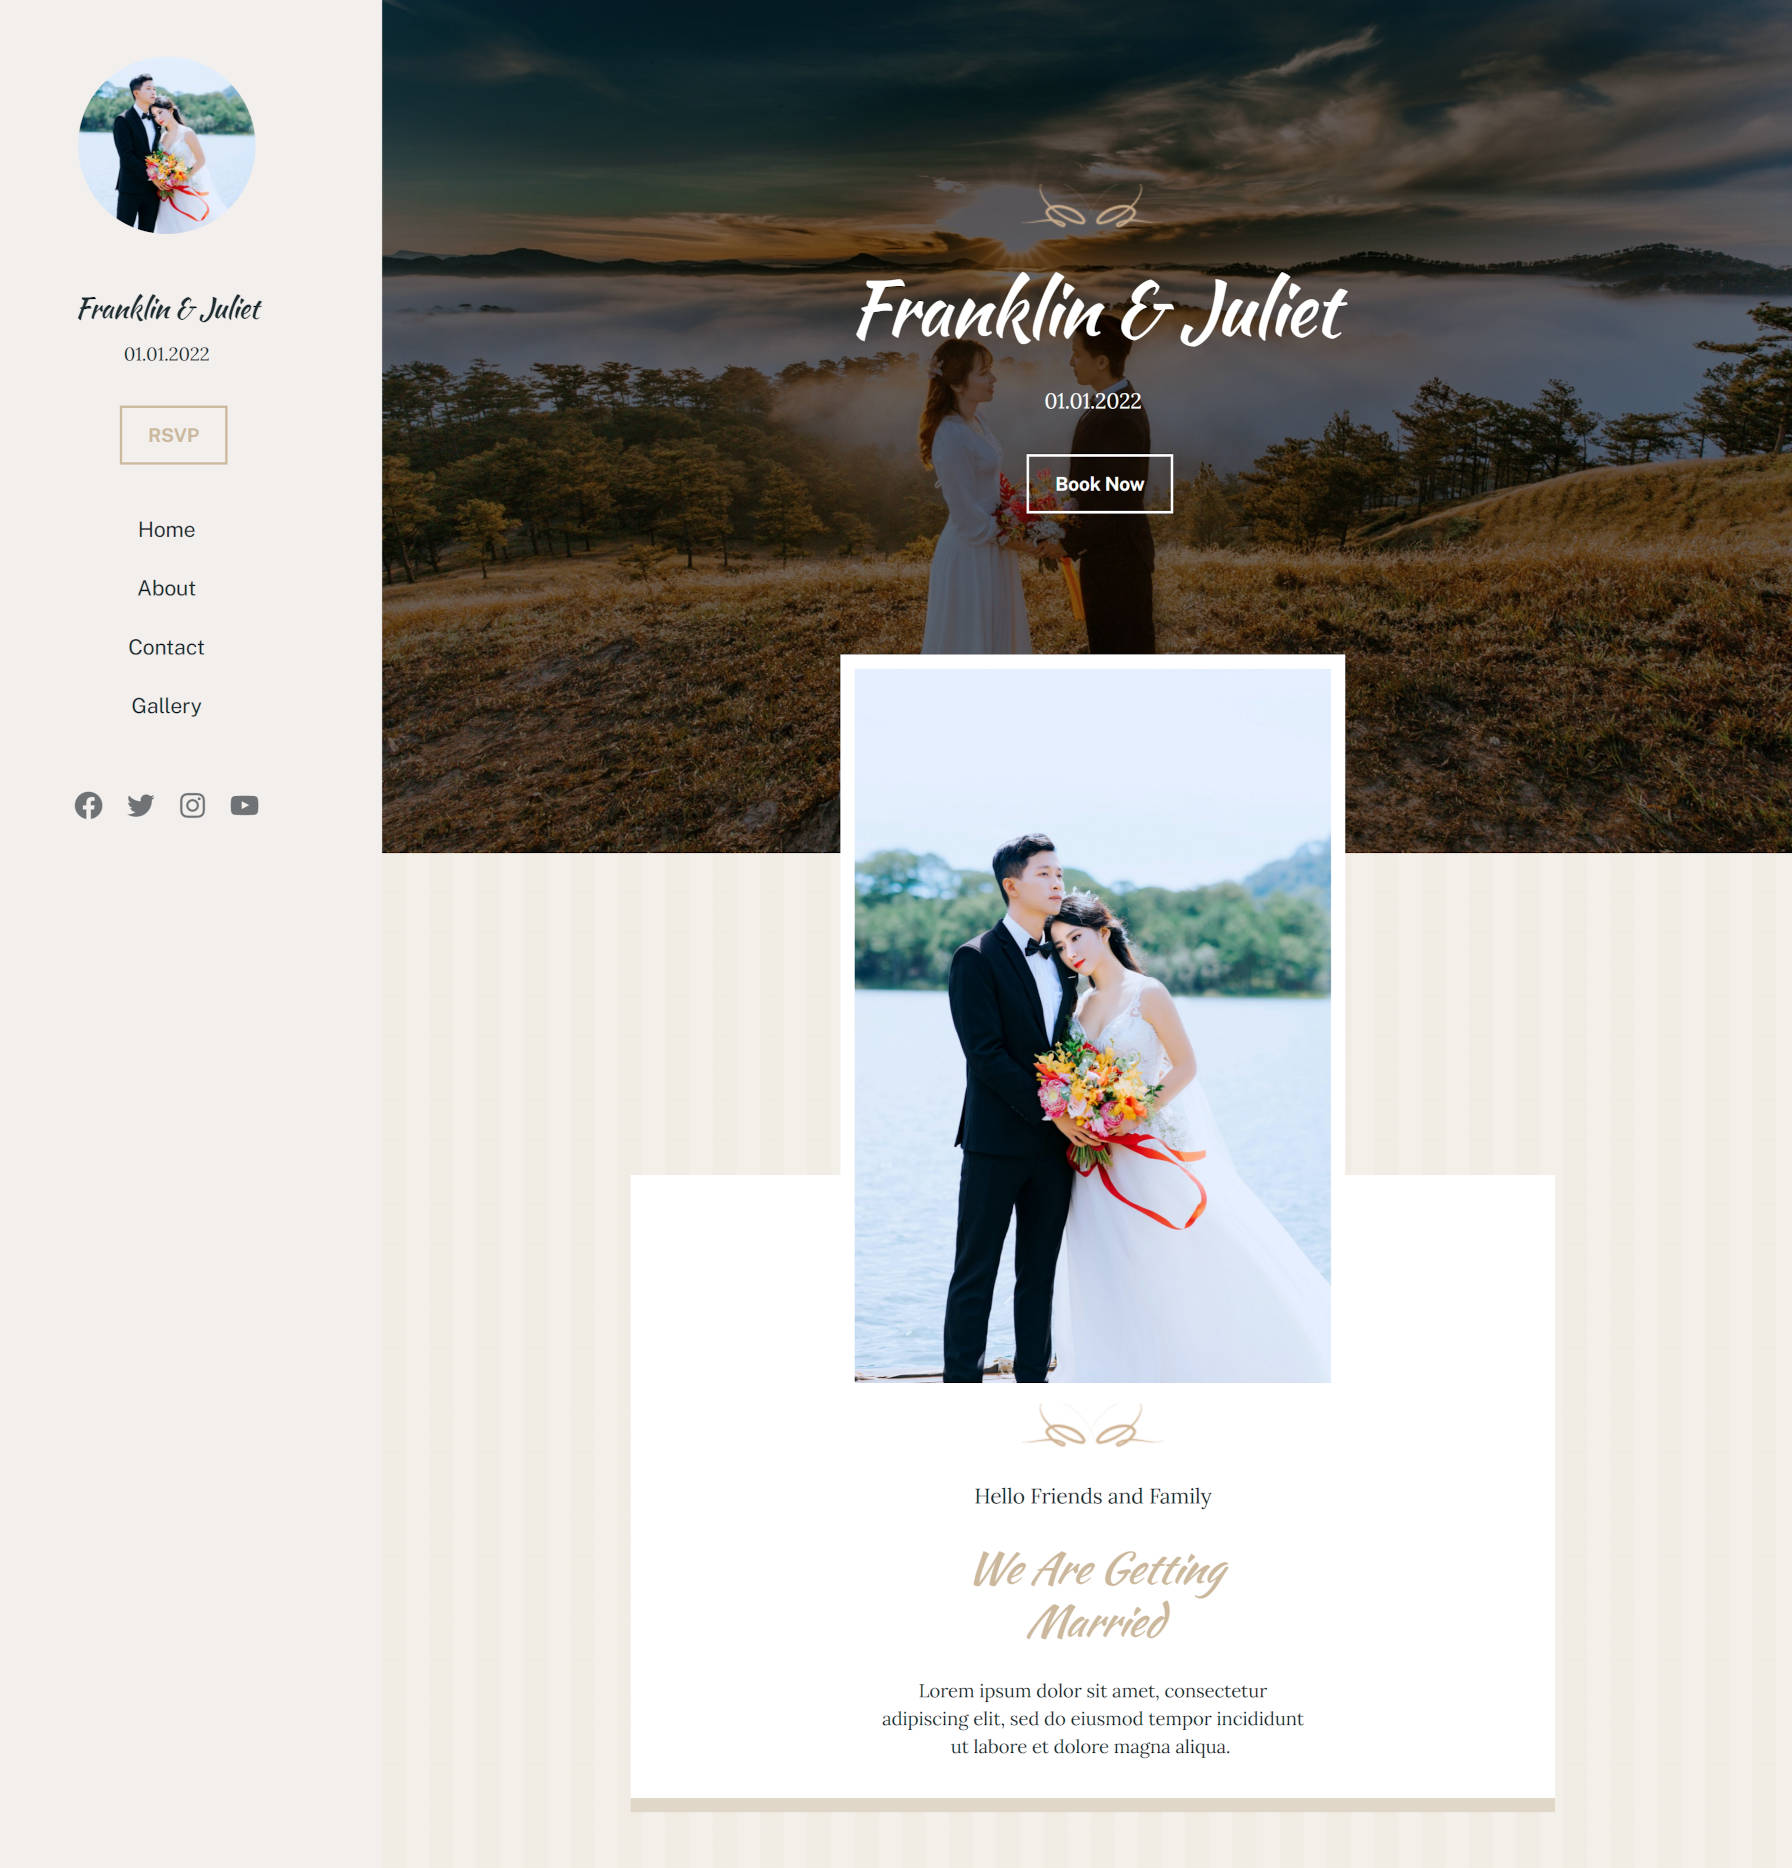 Full wedding page design with sidebar and wedding photos/content on the right.